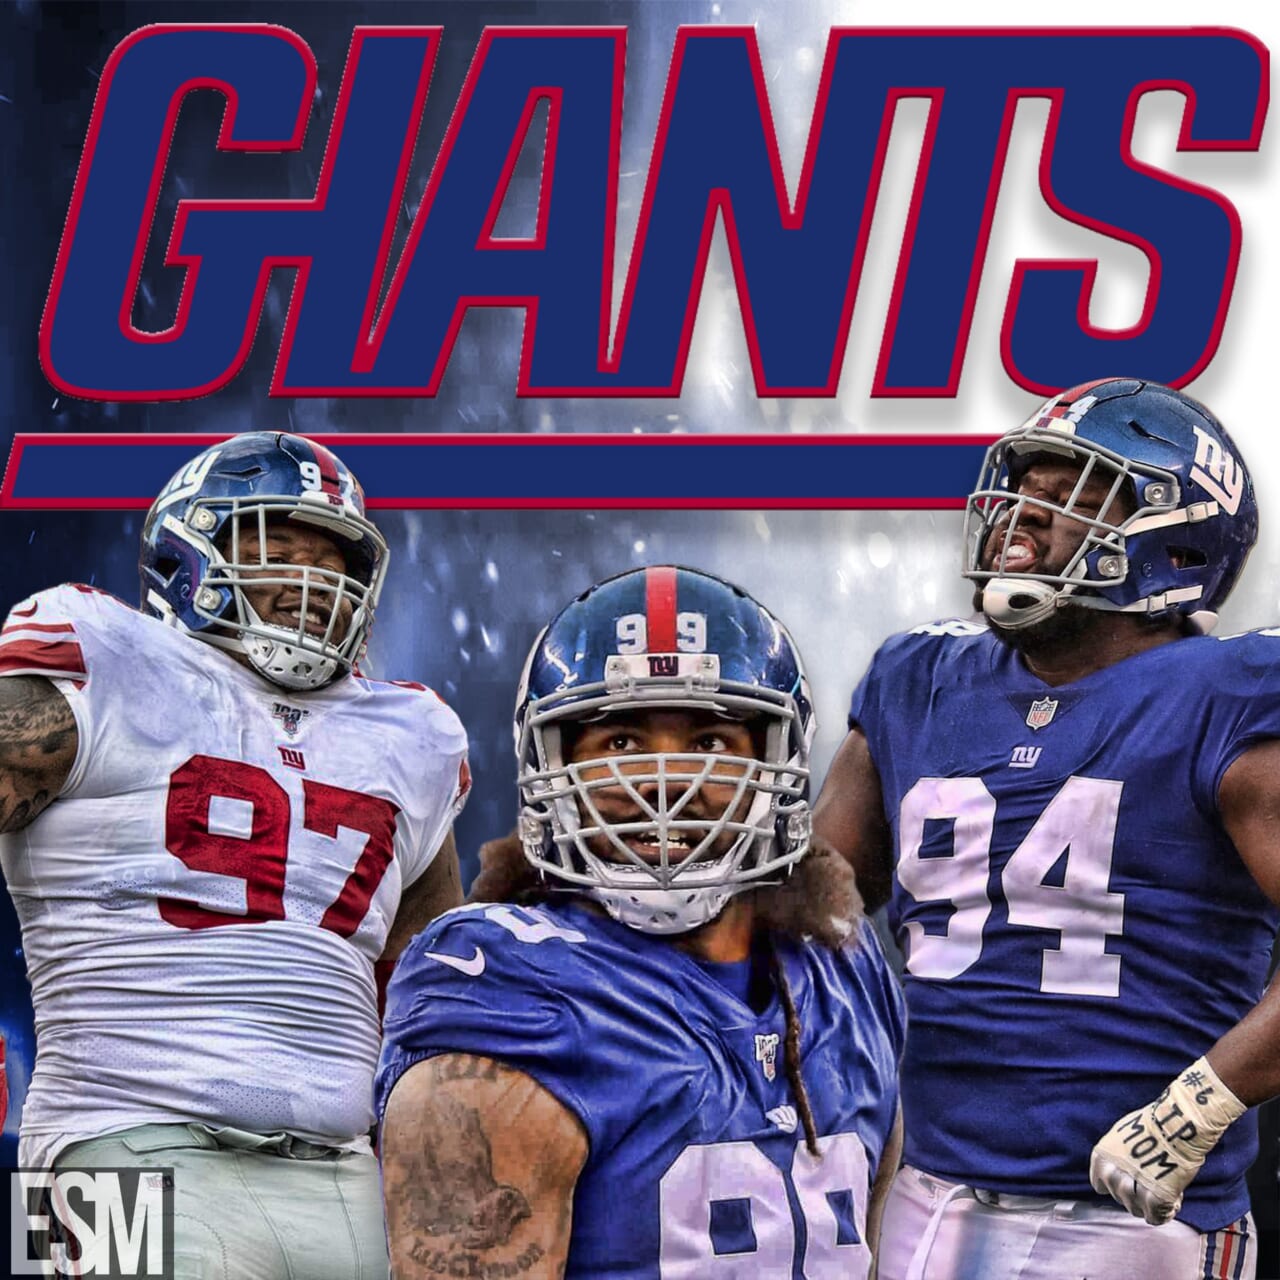 New York Giants: Why The Defensive Line Could Dominate In 2020